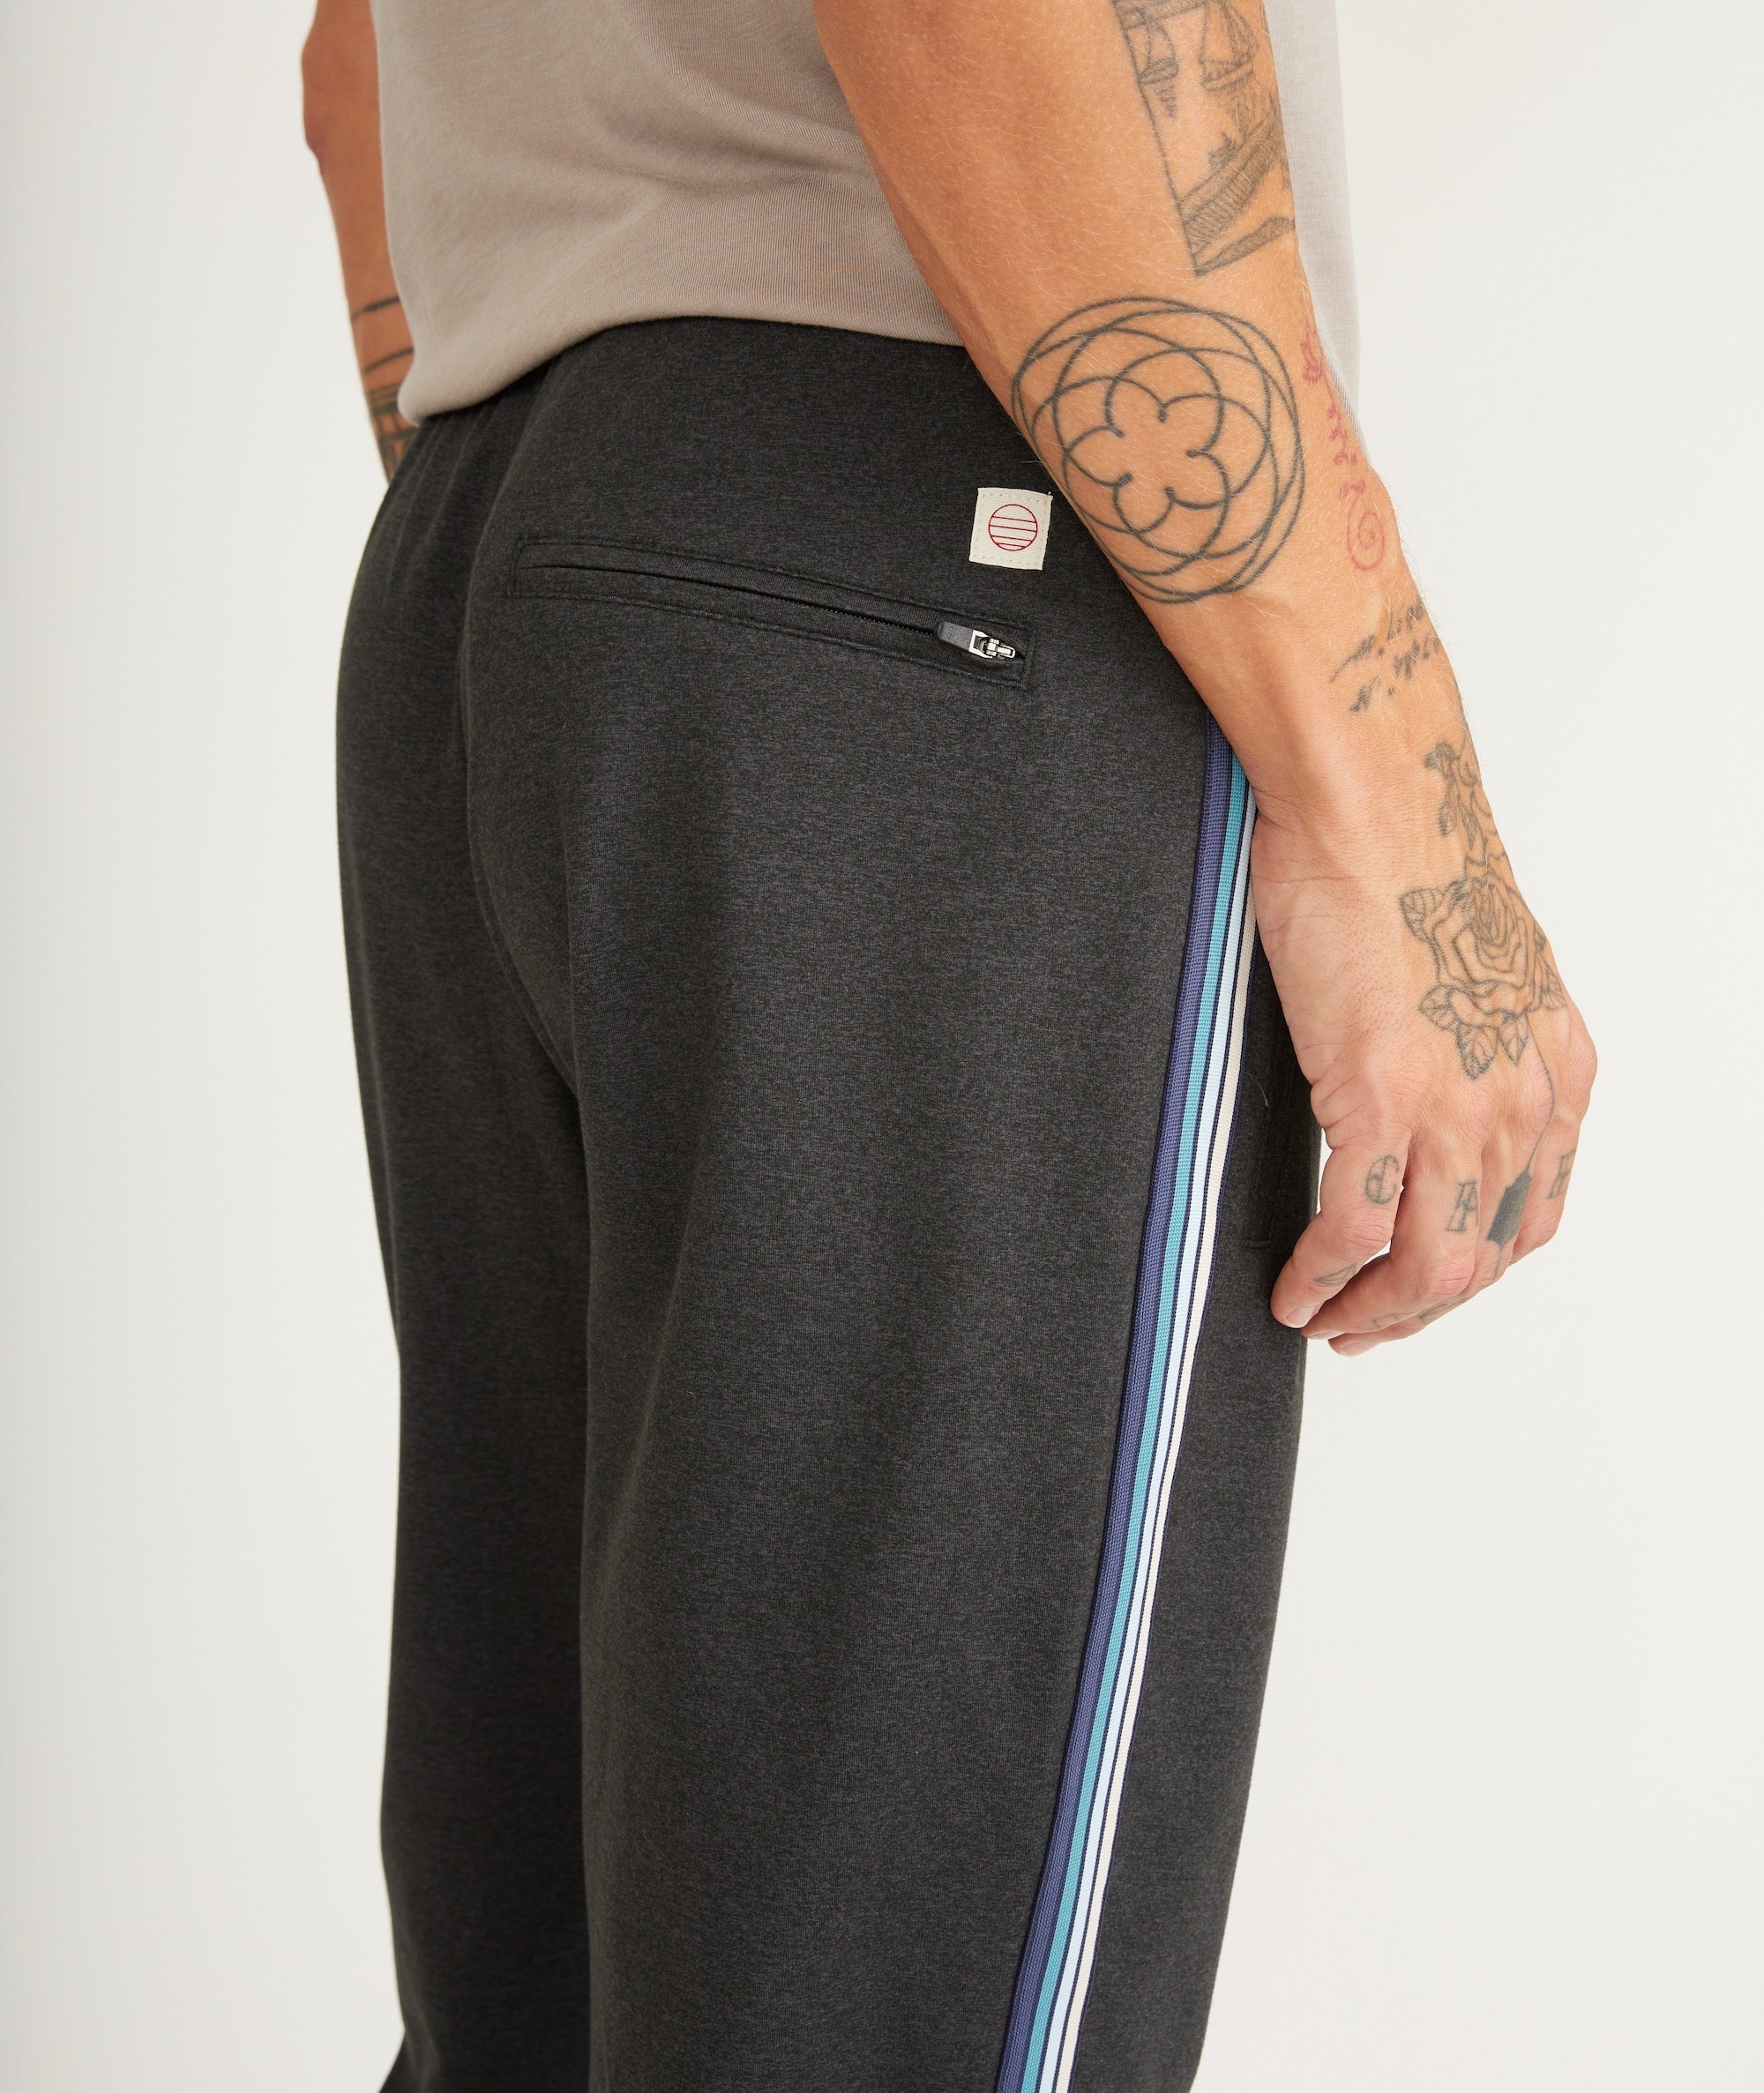 Adidas track pants - xl or XXL, any loose fit and straight leg style | Adidas  track pants, Track pants mens, Tracksuit bottoms